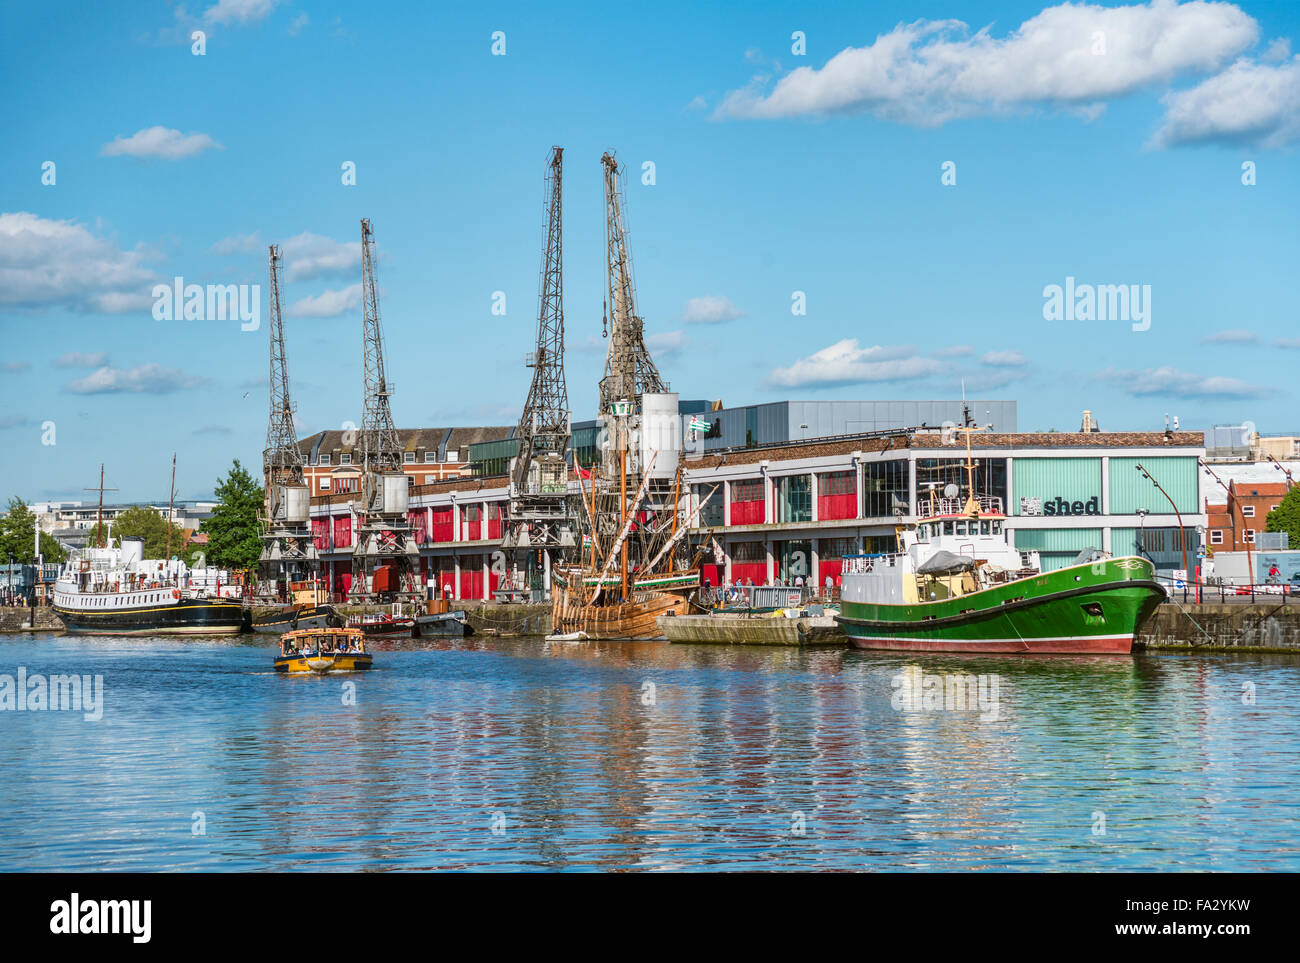 M-Shed, a museum of Bristol life at the Floating Harbour, Somerset, England Stock Photo